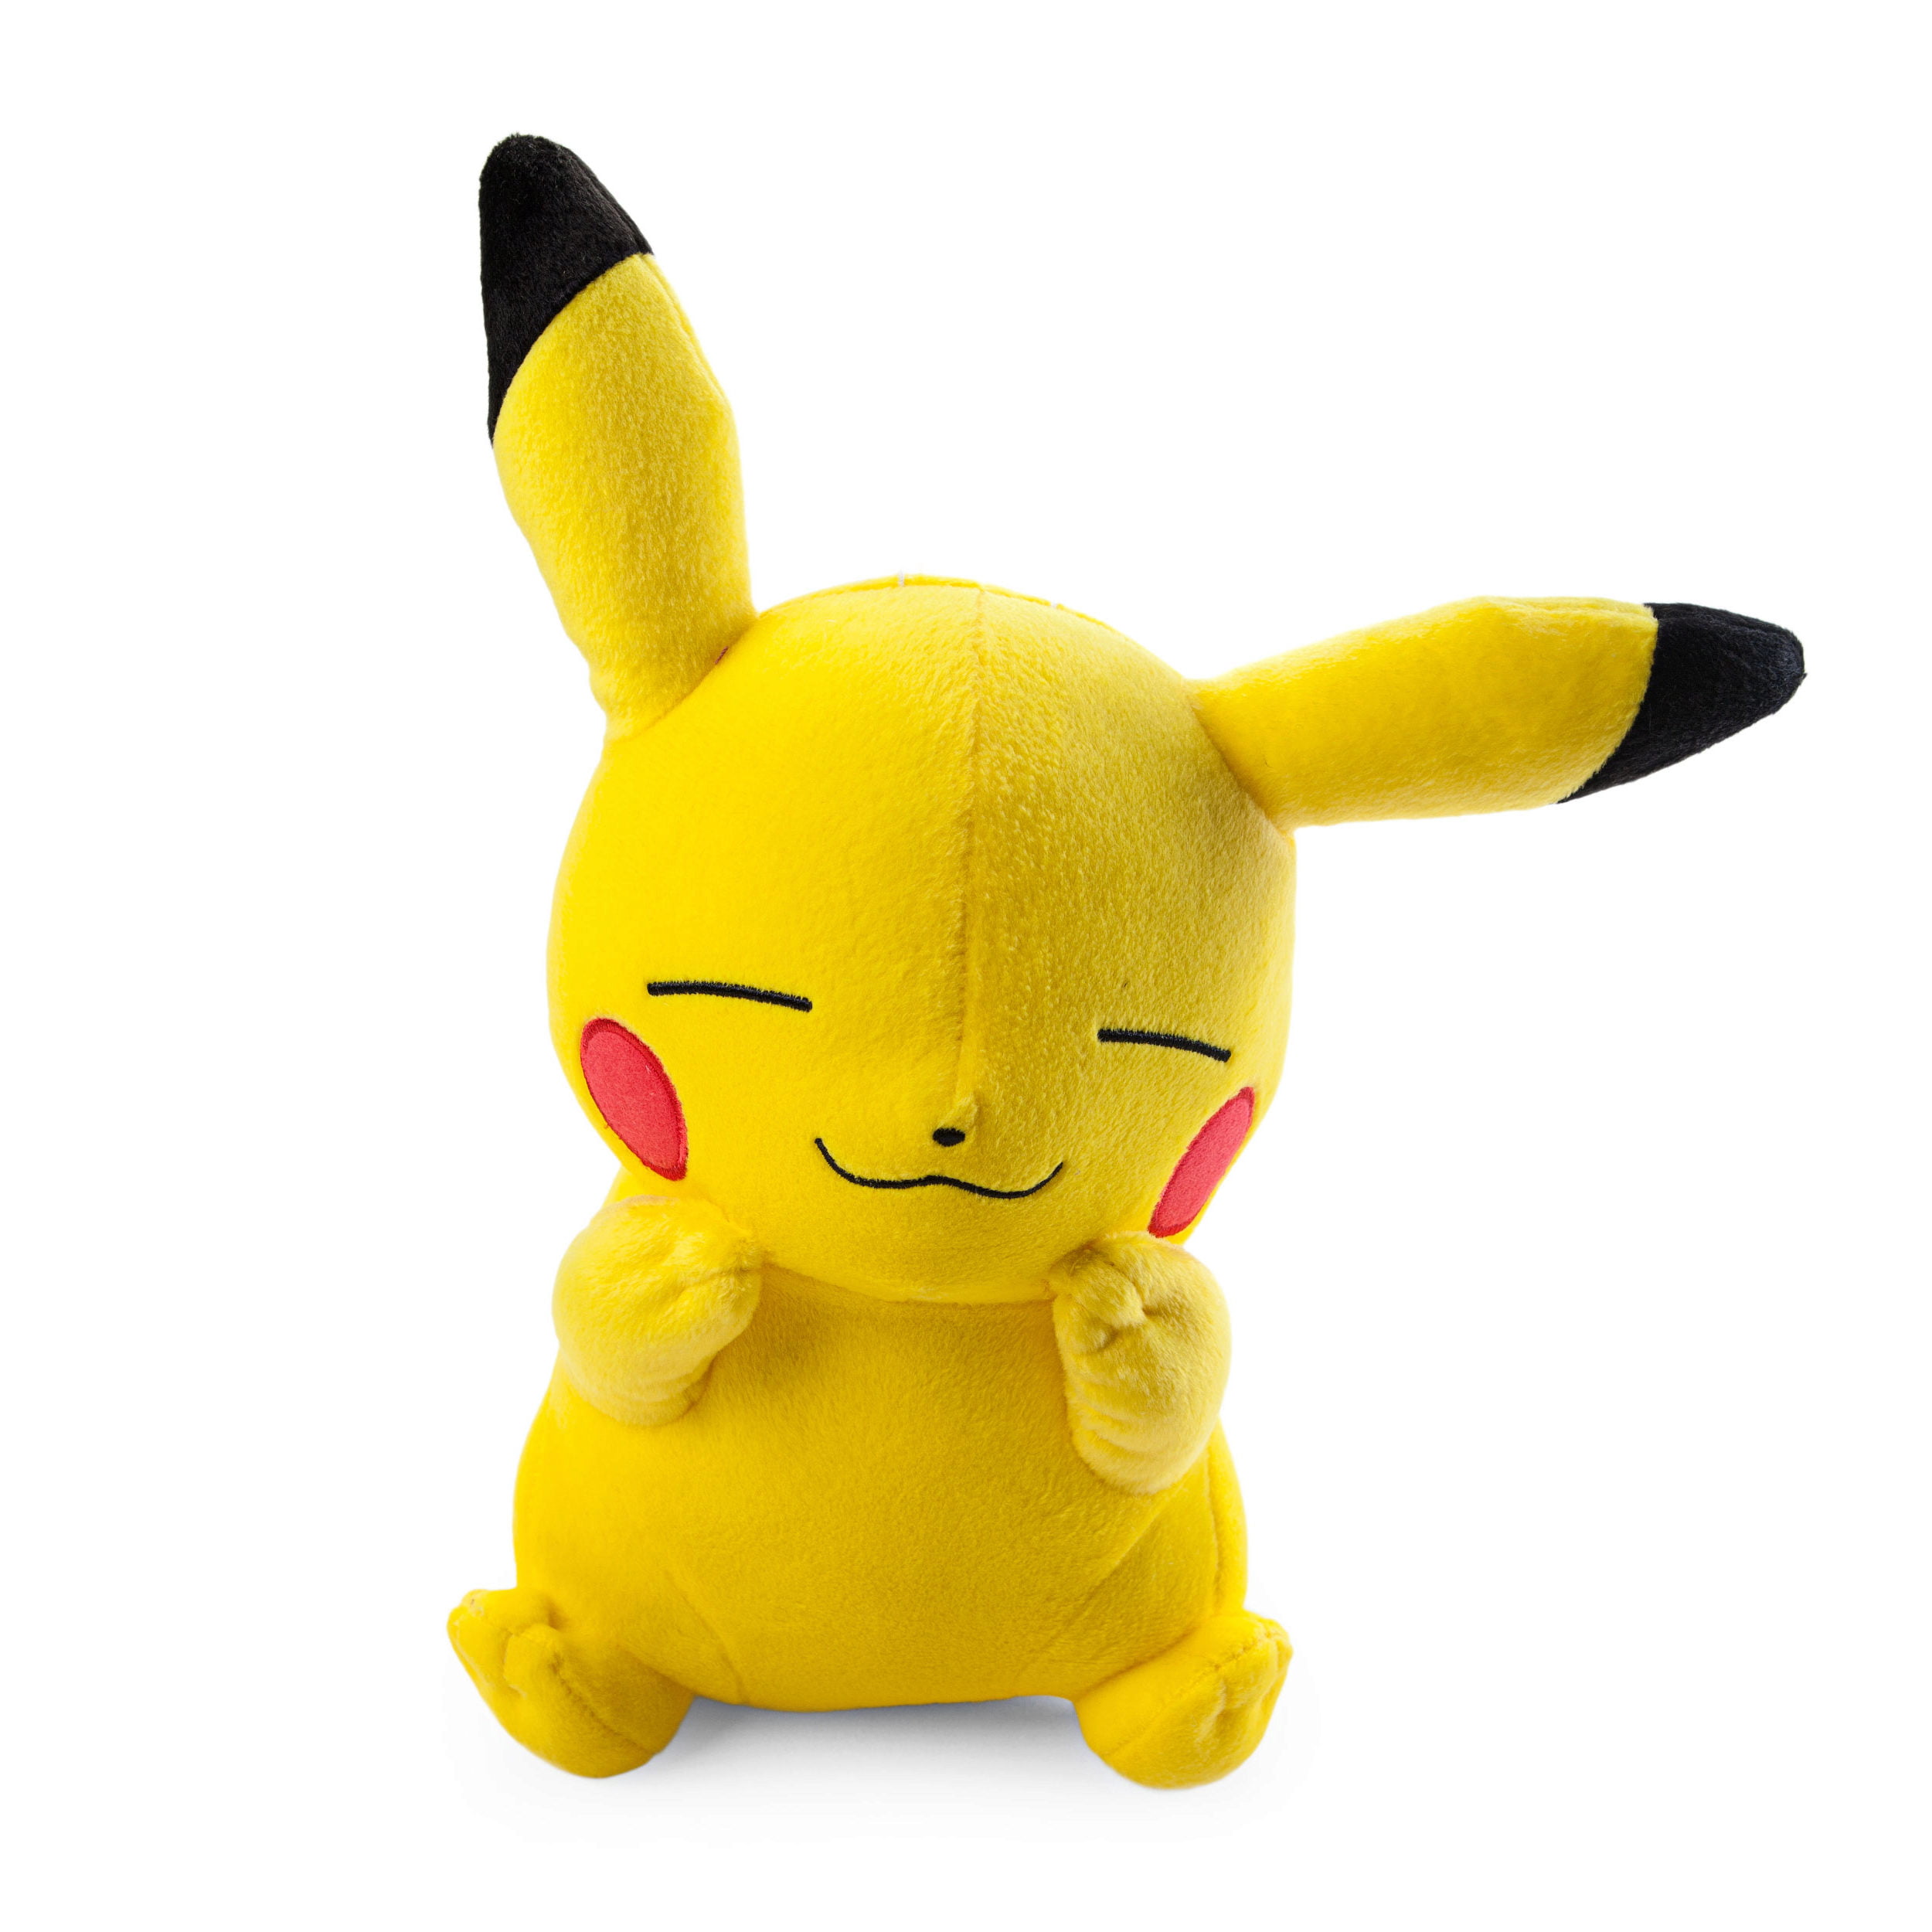 Wicked Cool Toys Pokemon Pikachu 9” Plush Toy 2020 With Tags for sale online